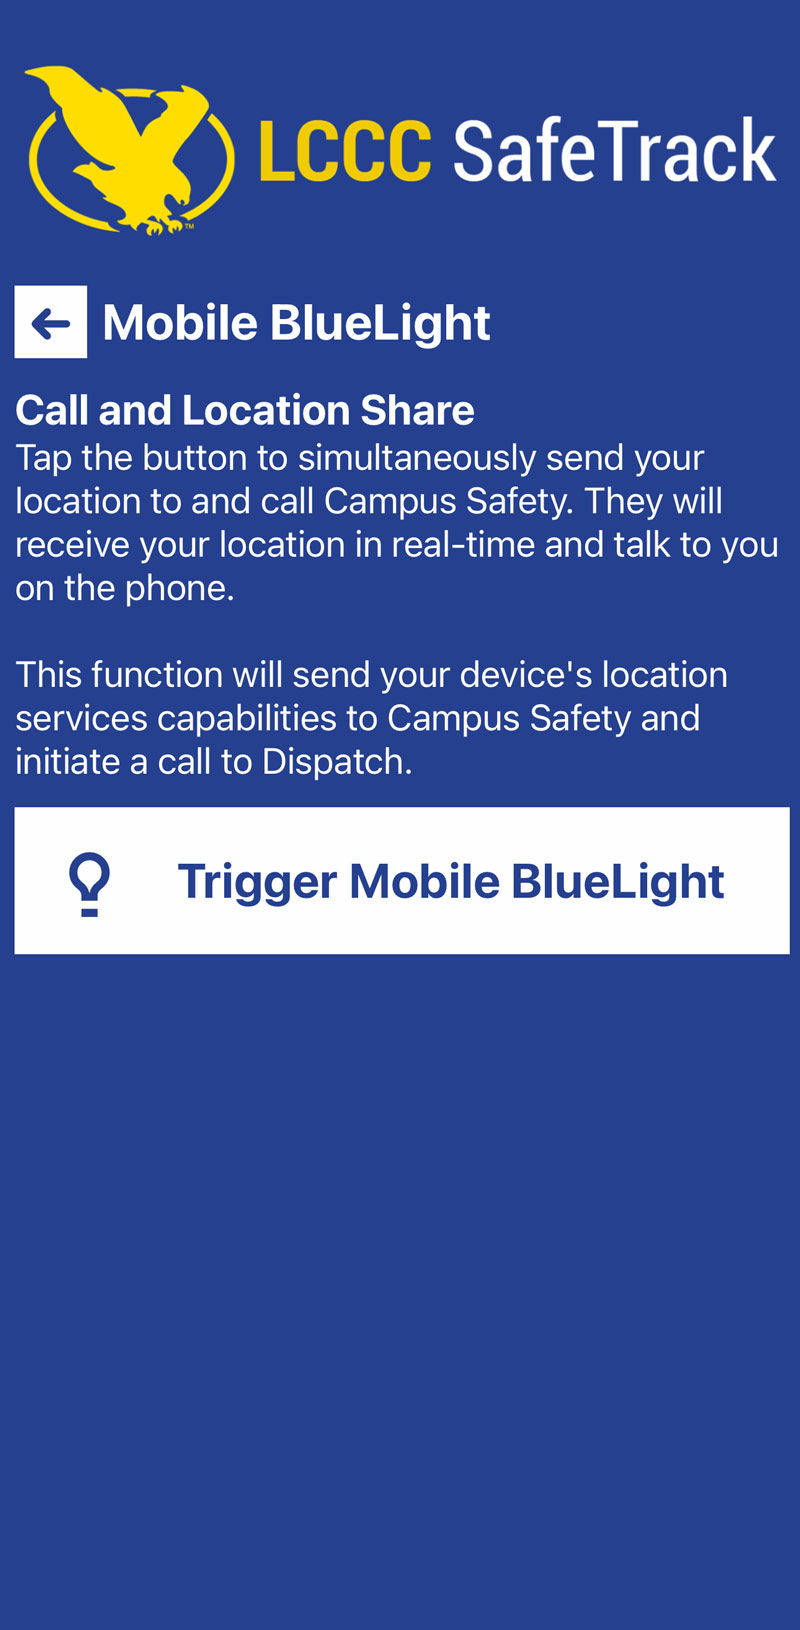 Screenshot of app with Mobile Bluelight page showing